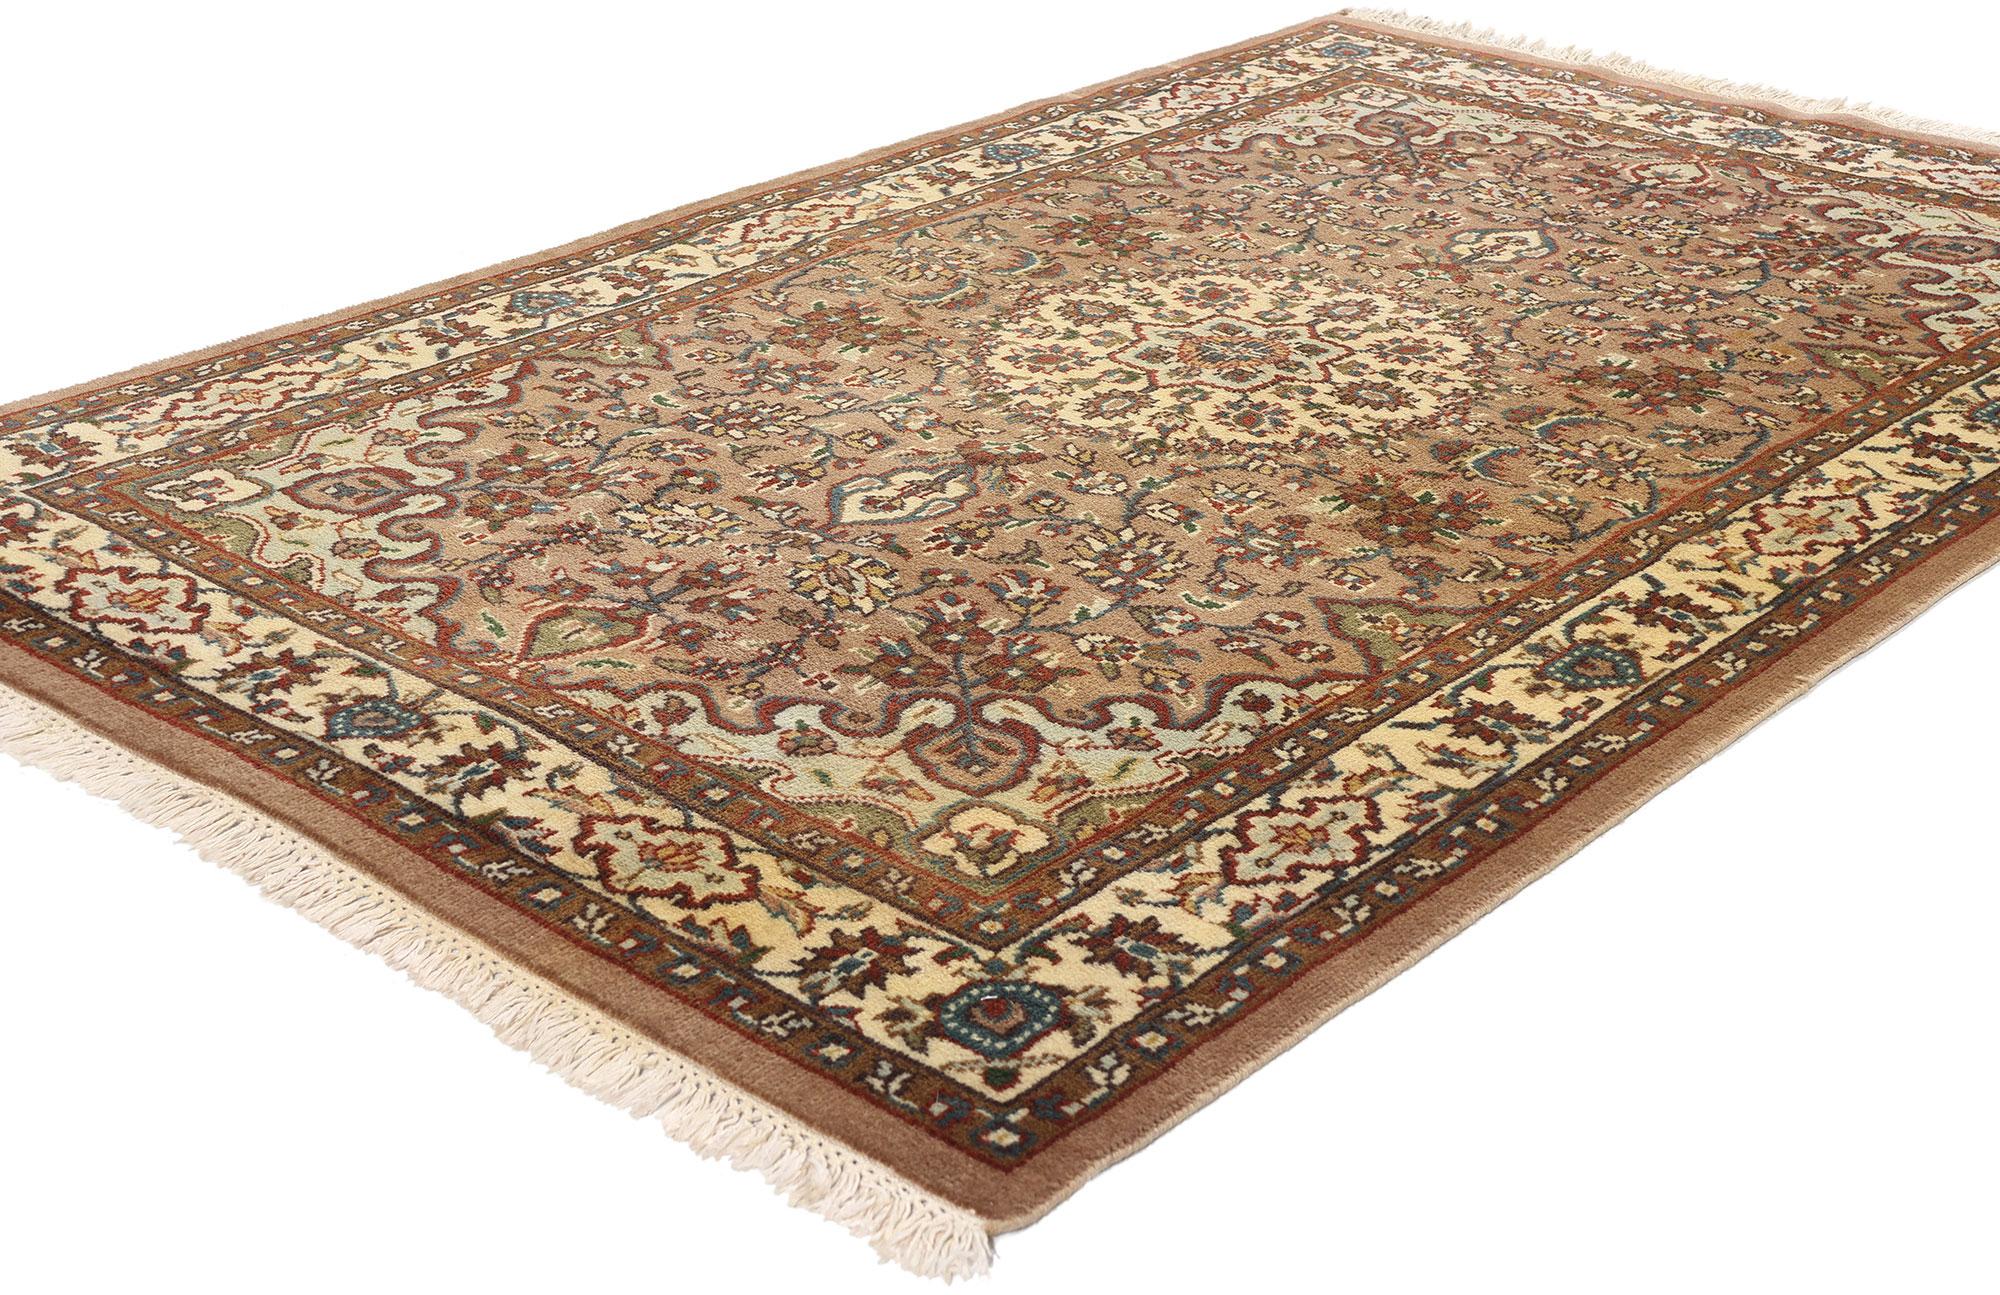 78783 Vintage Indian Isfahan Rug, 04'00 x 06'04. Indian Isfahan rugs are handwoven rugs crafted in India, inspired by the traditional Persian Isfahan rugs known for their intricate designs and fine craftsmanship. These Isfahan style rugs mimic the